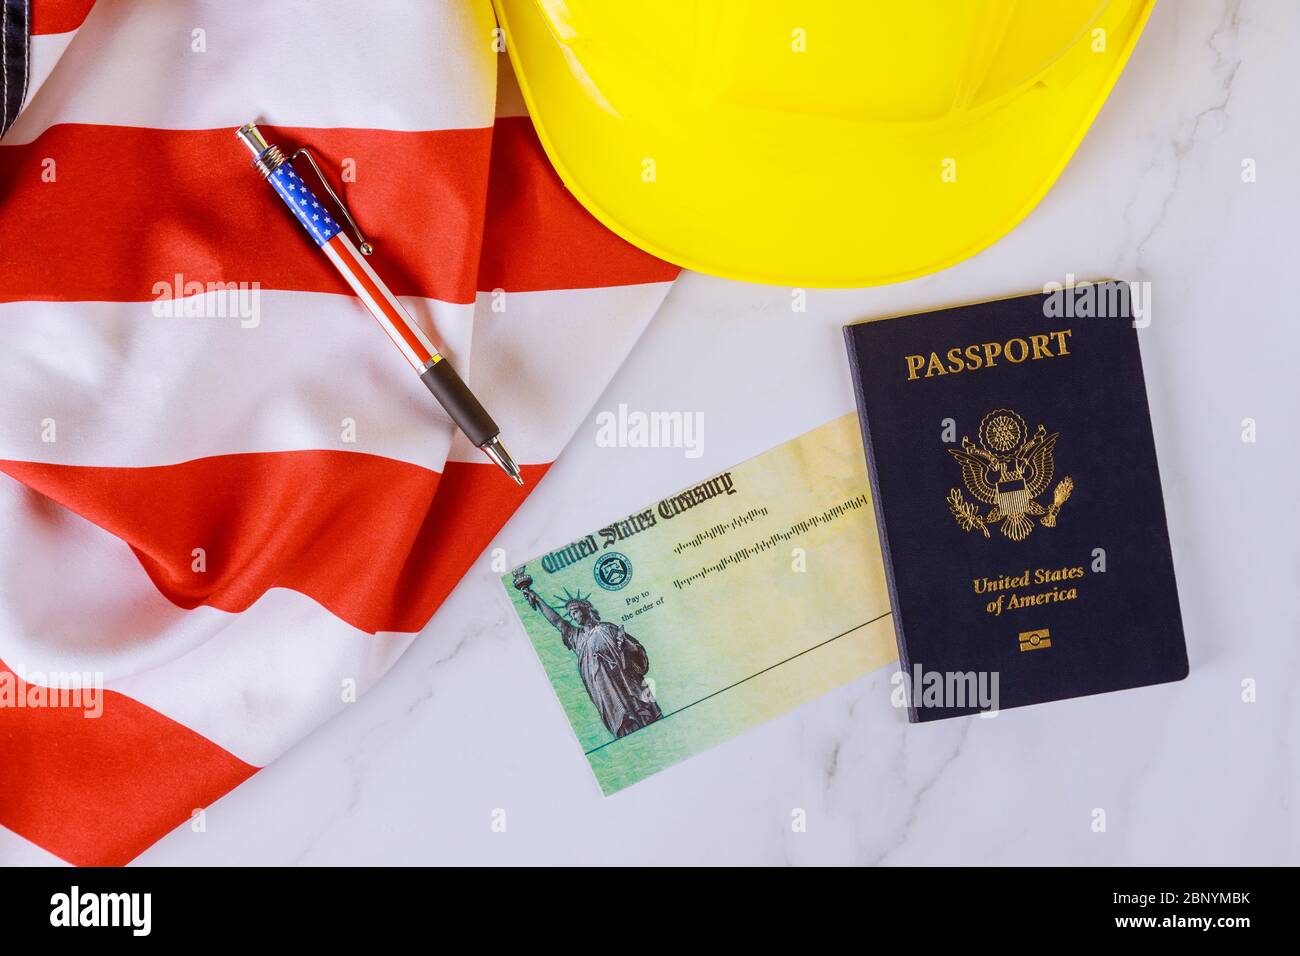 American flag on Stimulus financial relief check to the Passport of USA in yellow hard hat Stock Photo